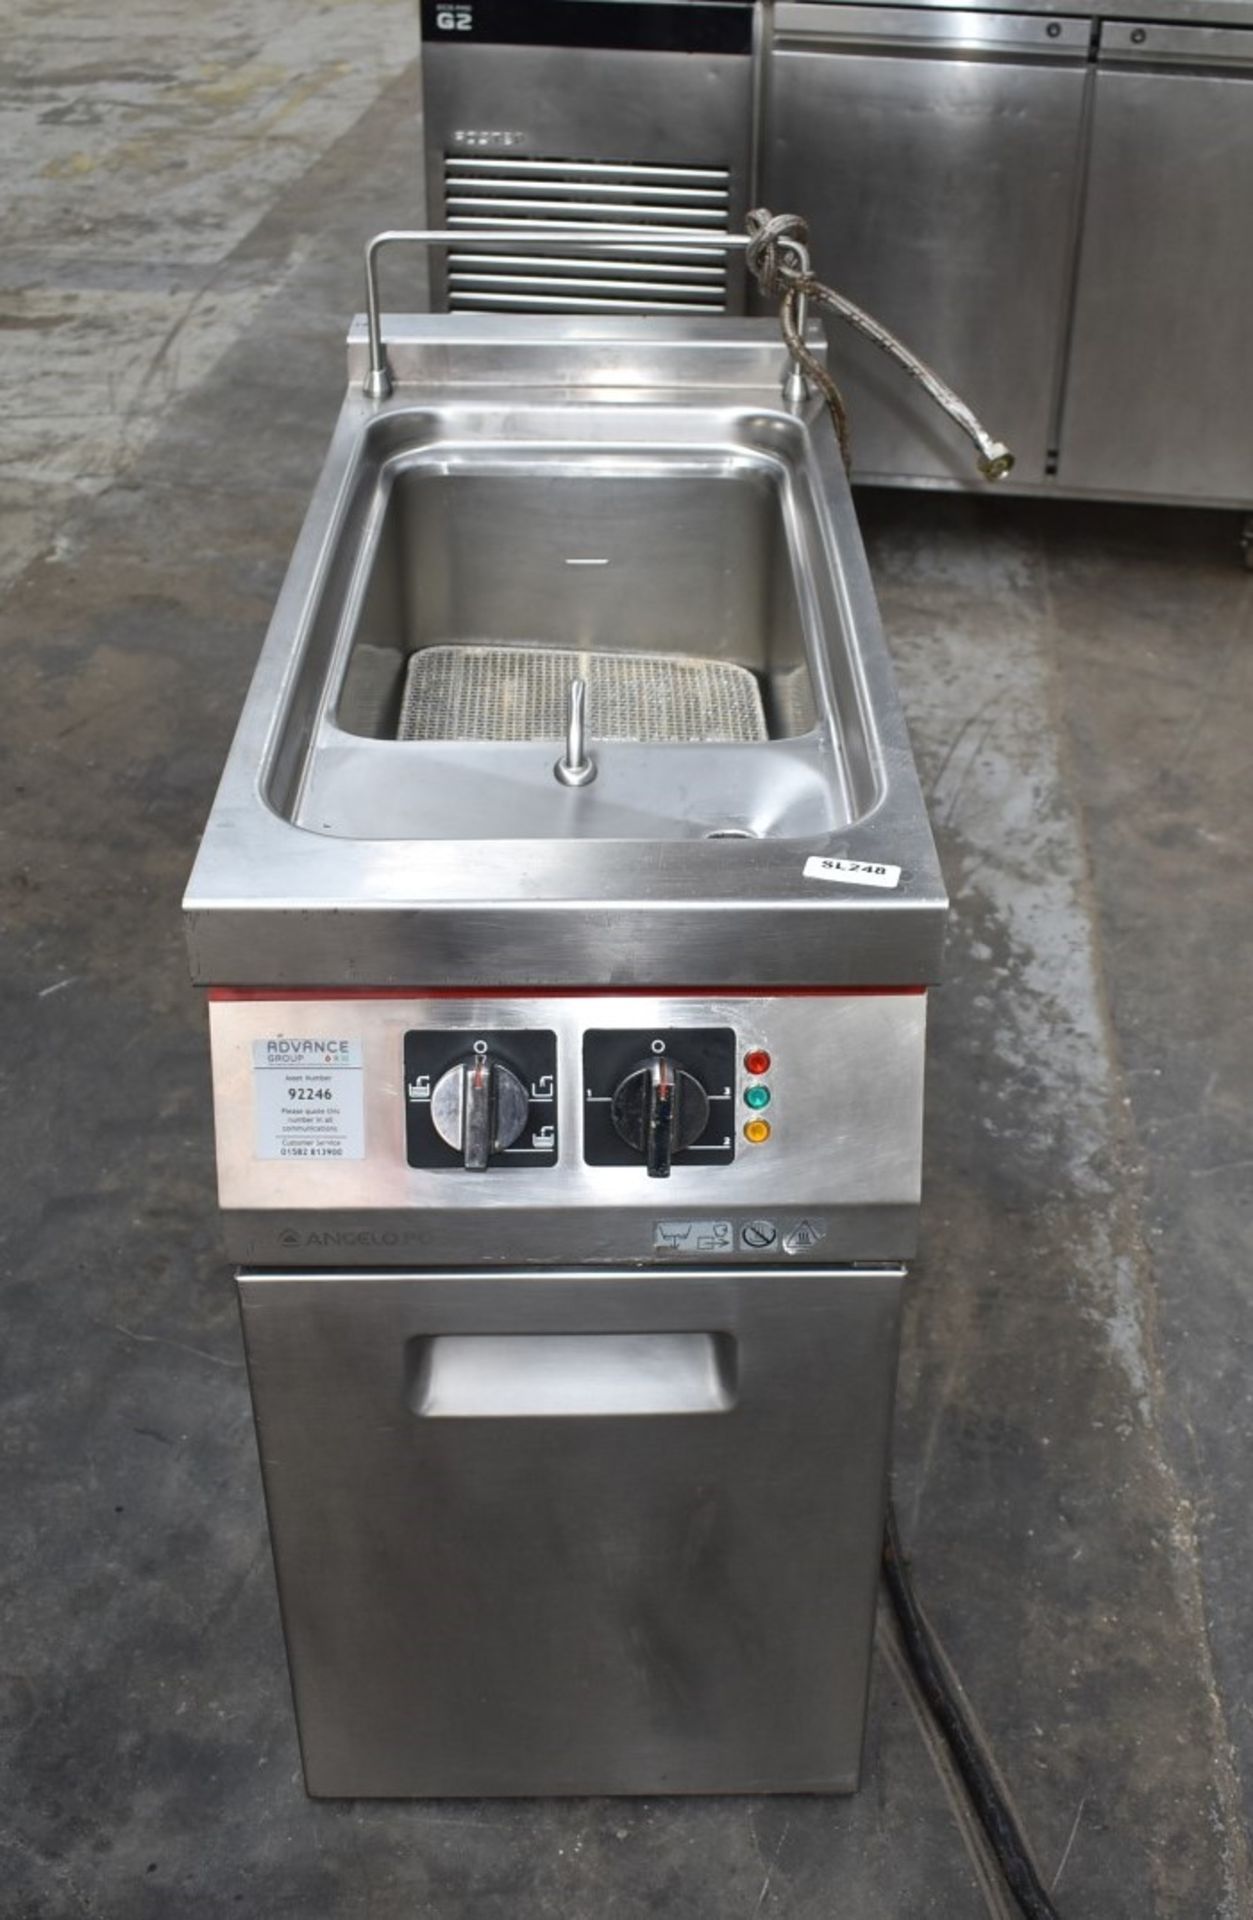 1 x Angelo Po Commercial Pasta Boiler With Stainless Steel Finish - 40cm Width - Recently Removed